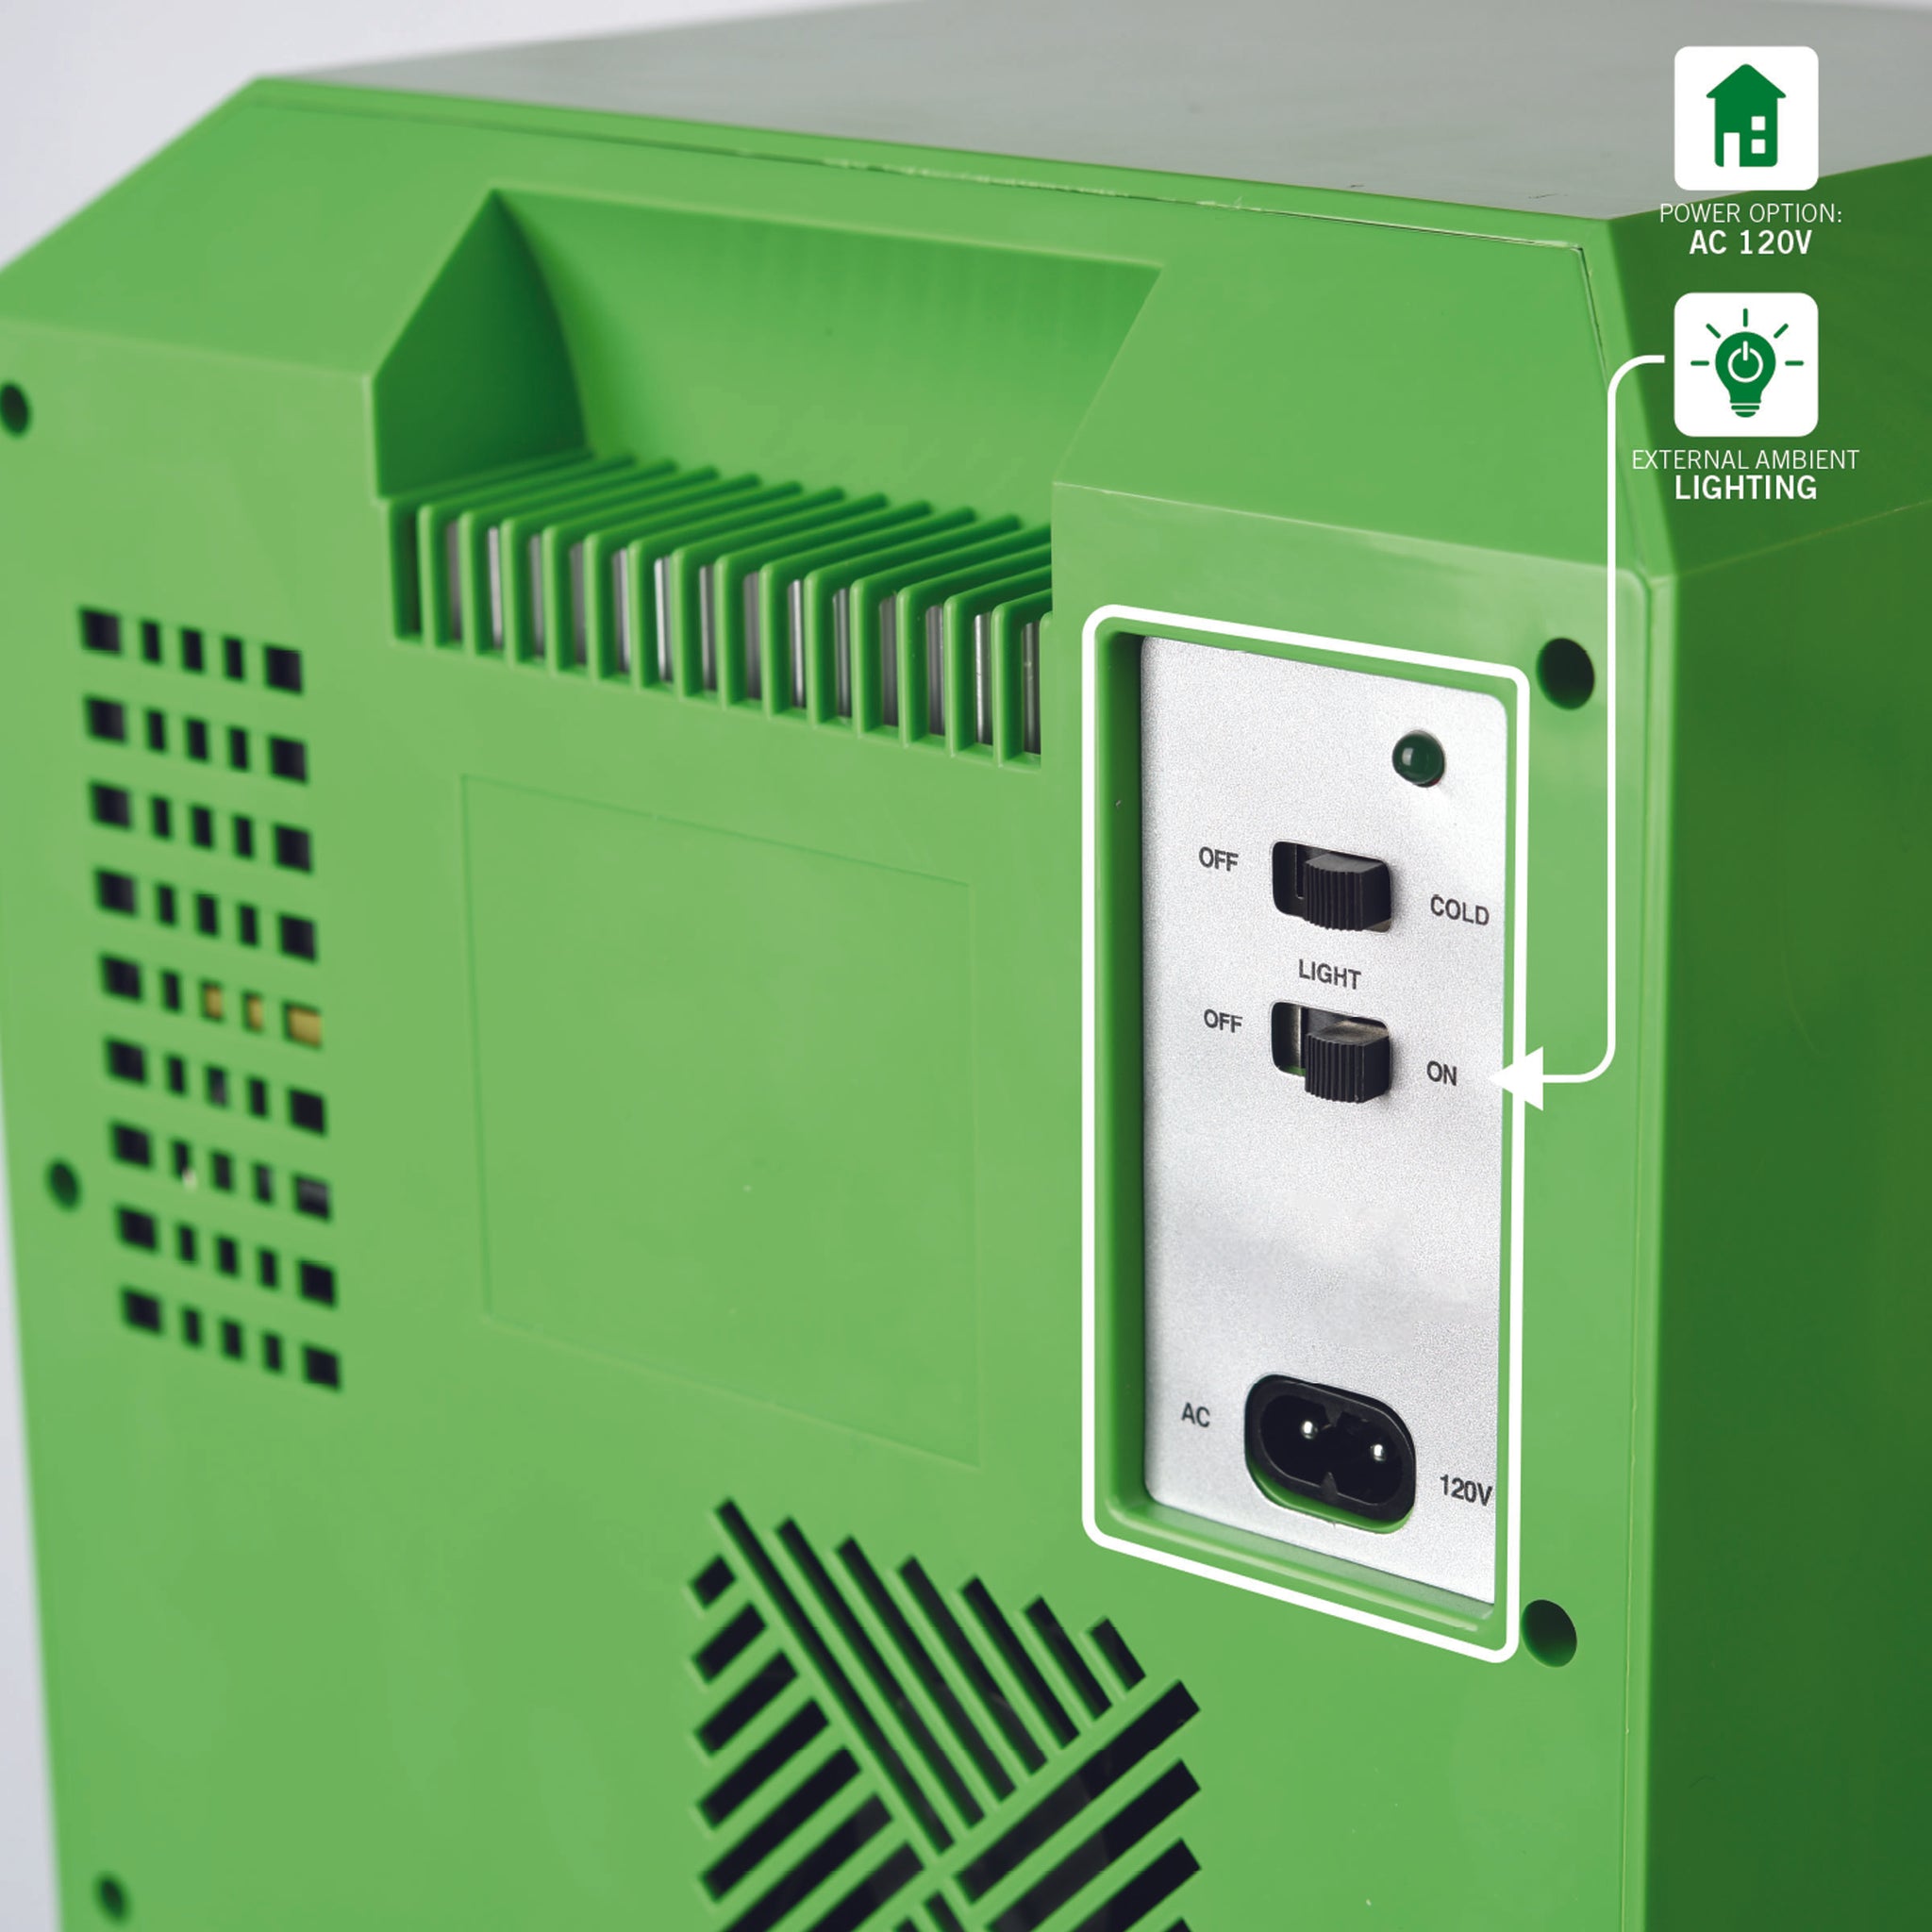 The Minecraft Creeper Mini Fridge Is Now Available At Target